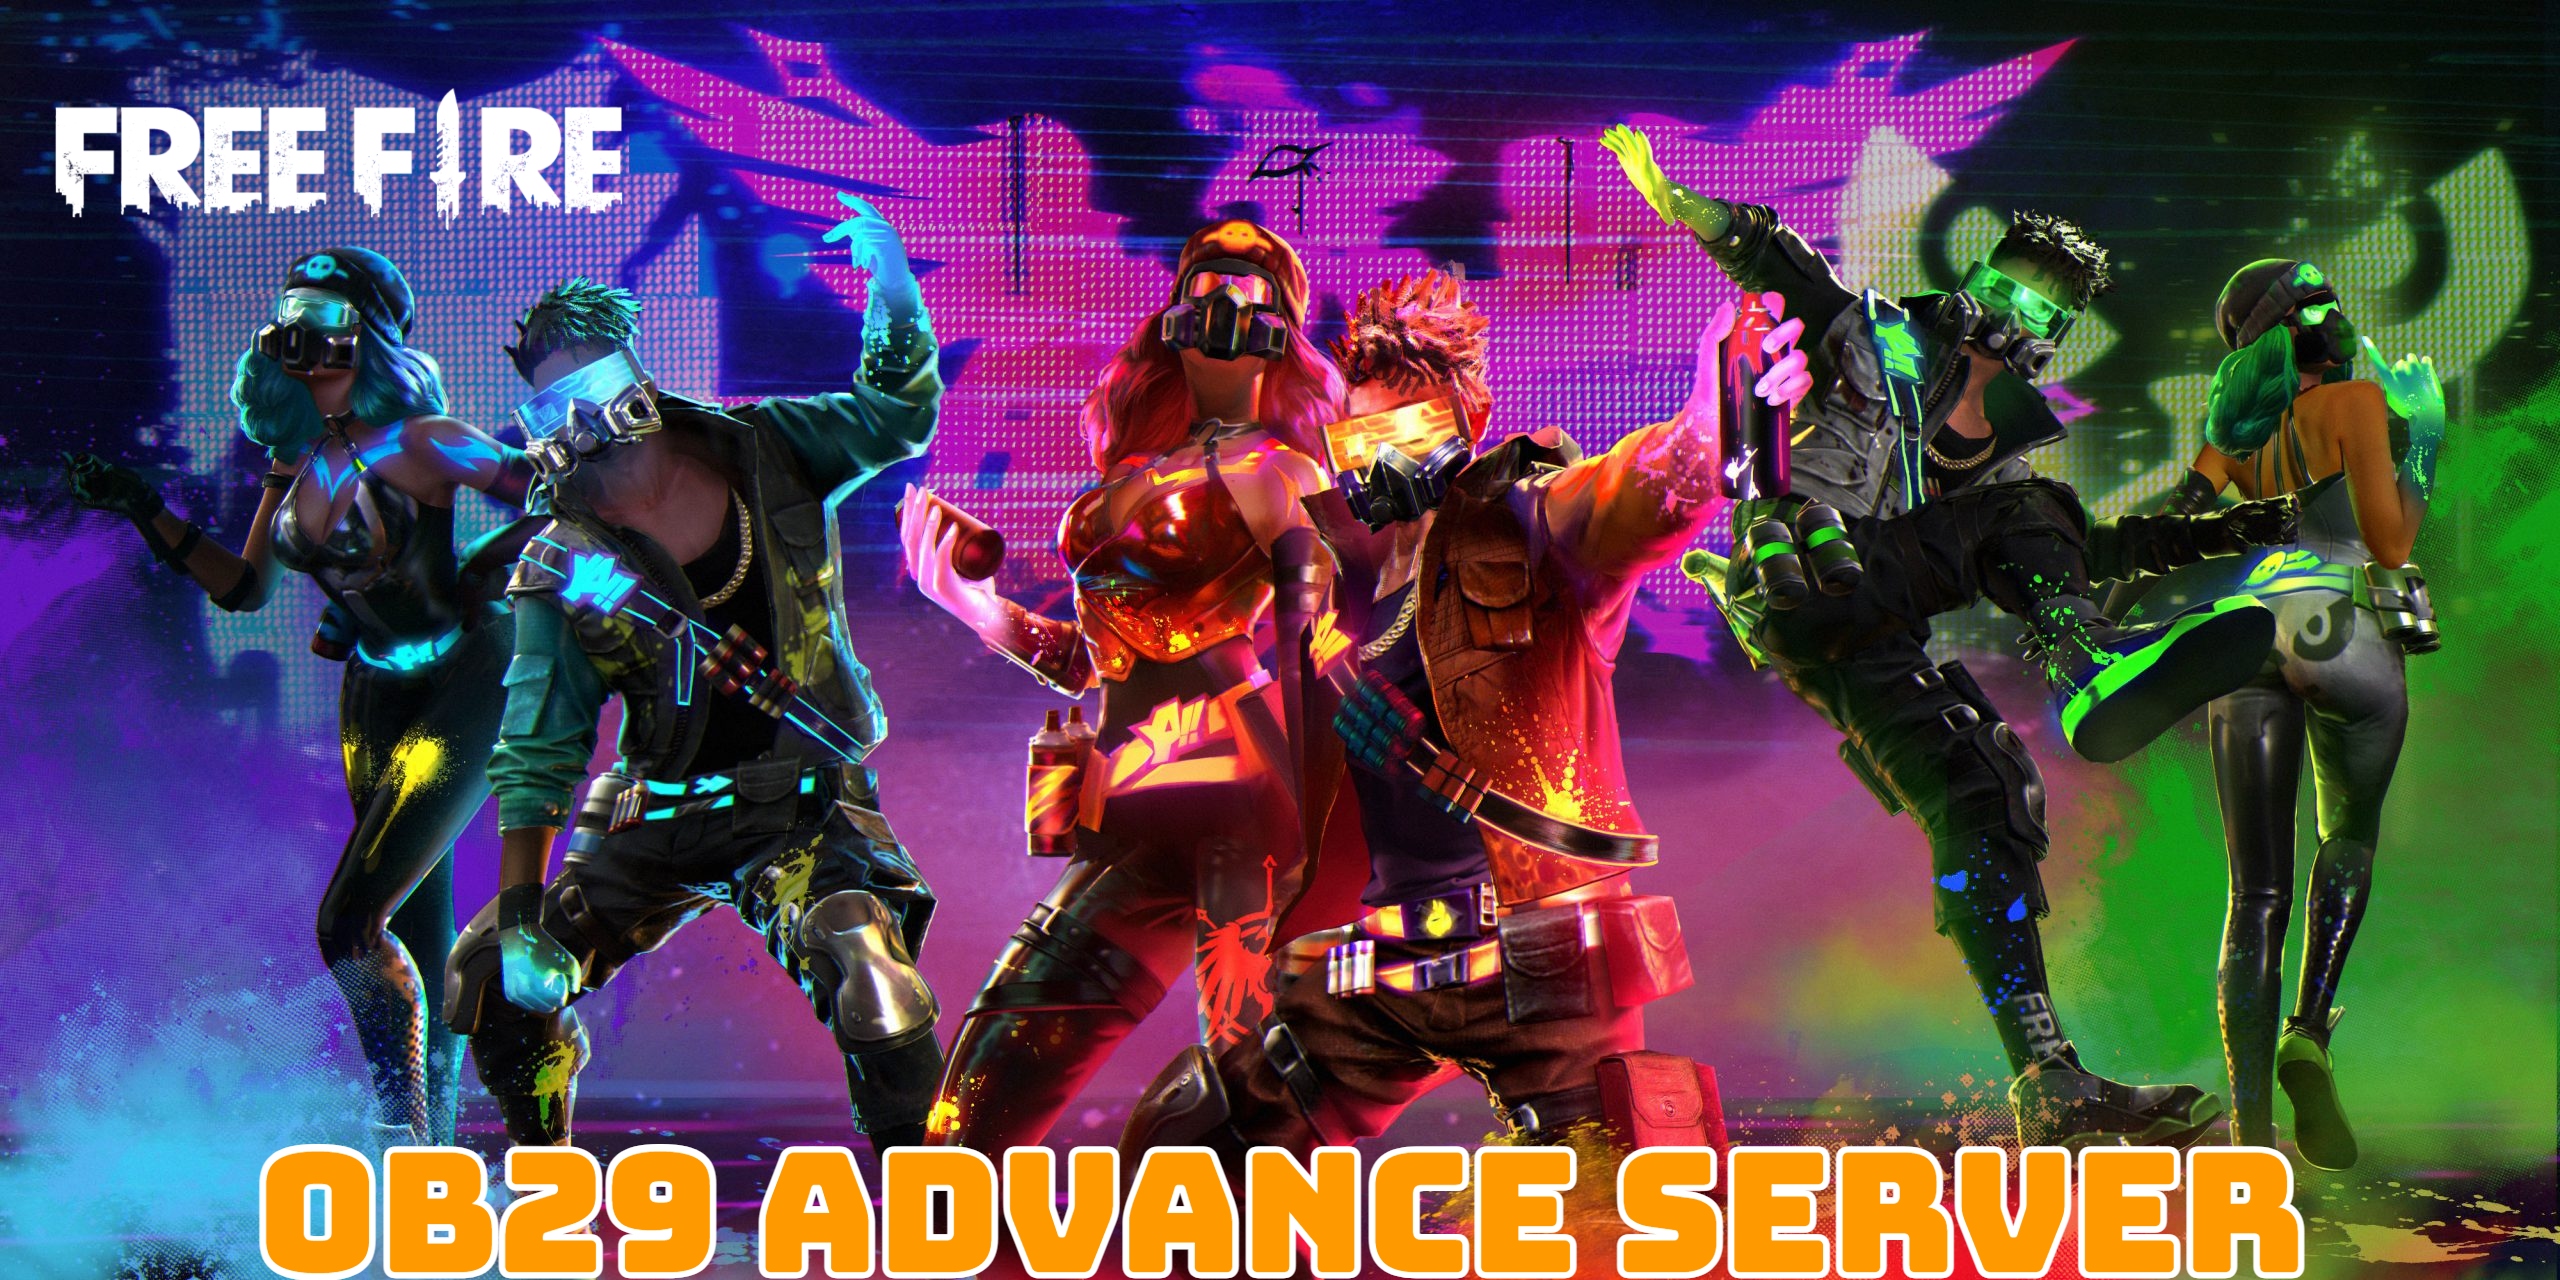 You are currently viewing Free Fire OB29 Advance Server: Start Date, Details, Free Diamonds